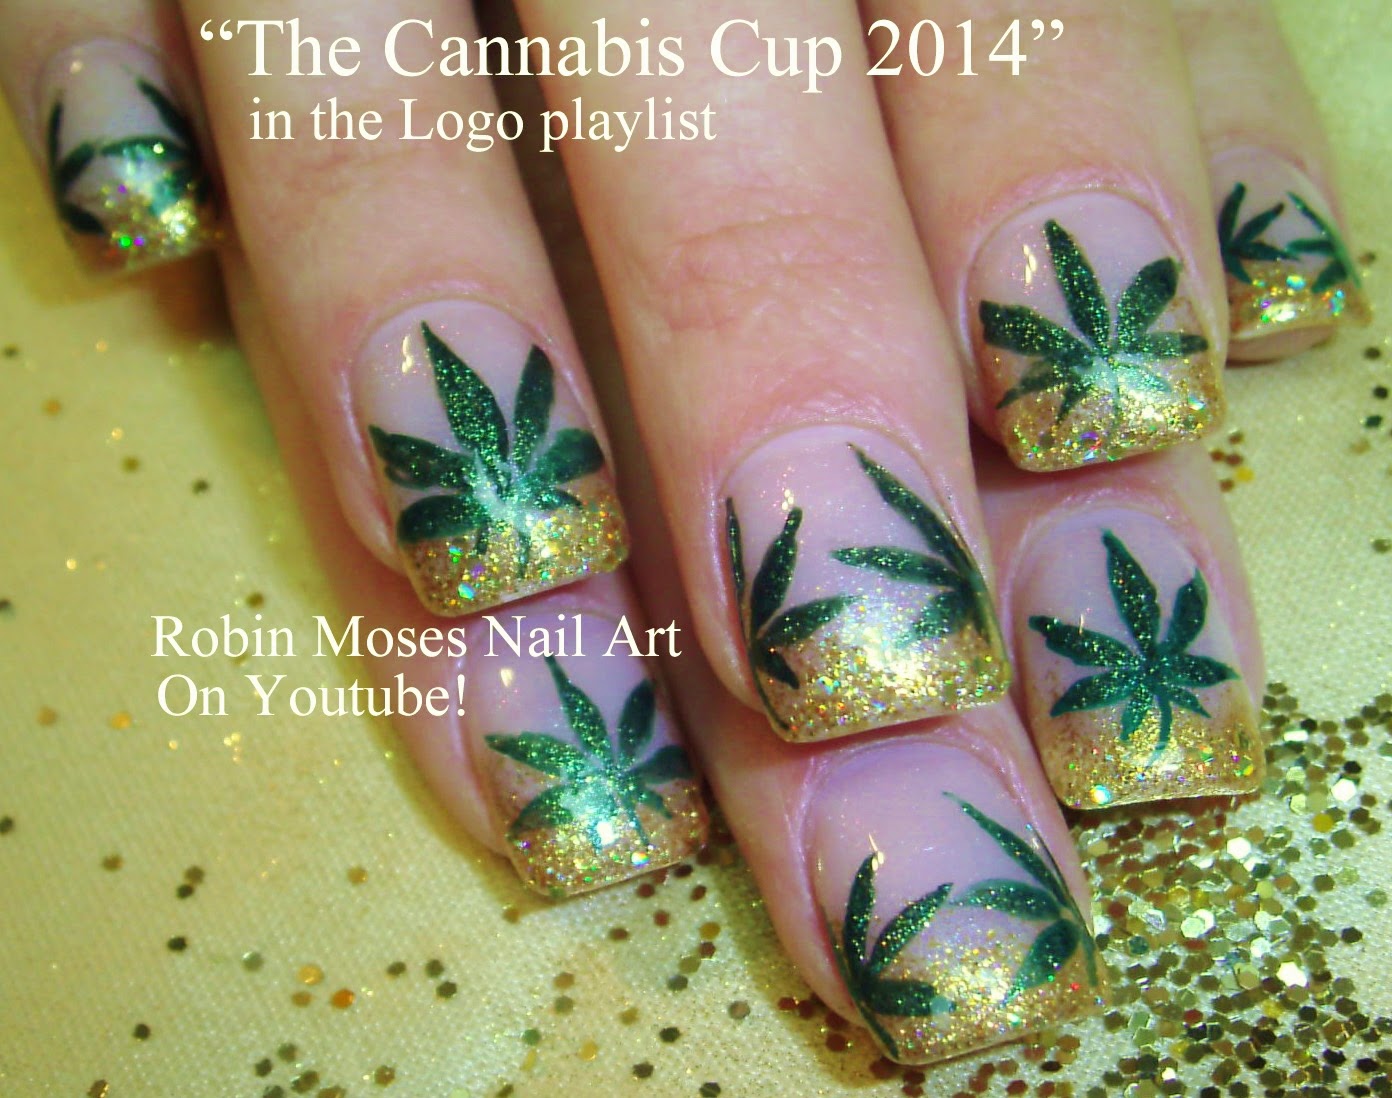 5. Weed Nail Art Inspiration - wide 1